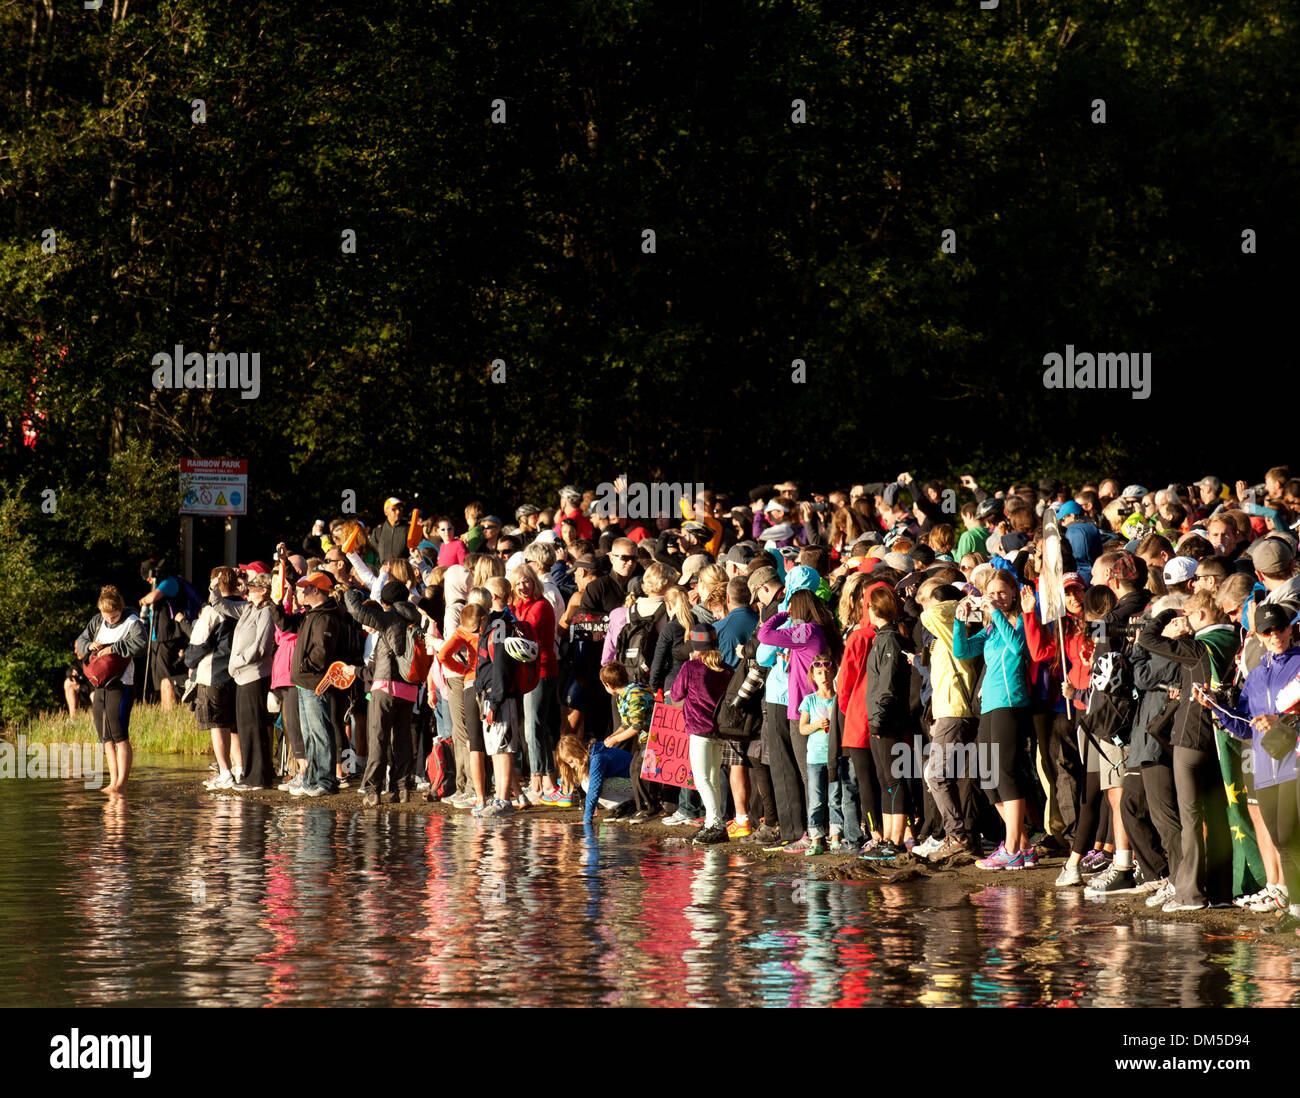 Spectators at Rainbow Park during the swim leg of the Ironman. 2013 Whistler Ironman Race. August 25th, 2013. Stock Photo